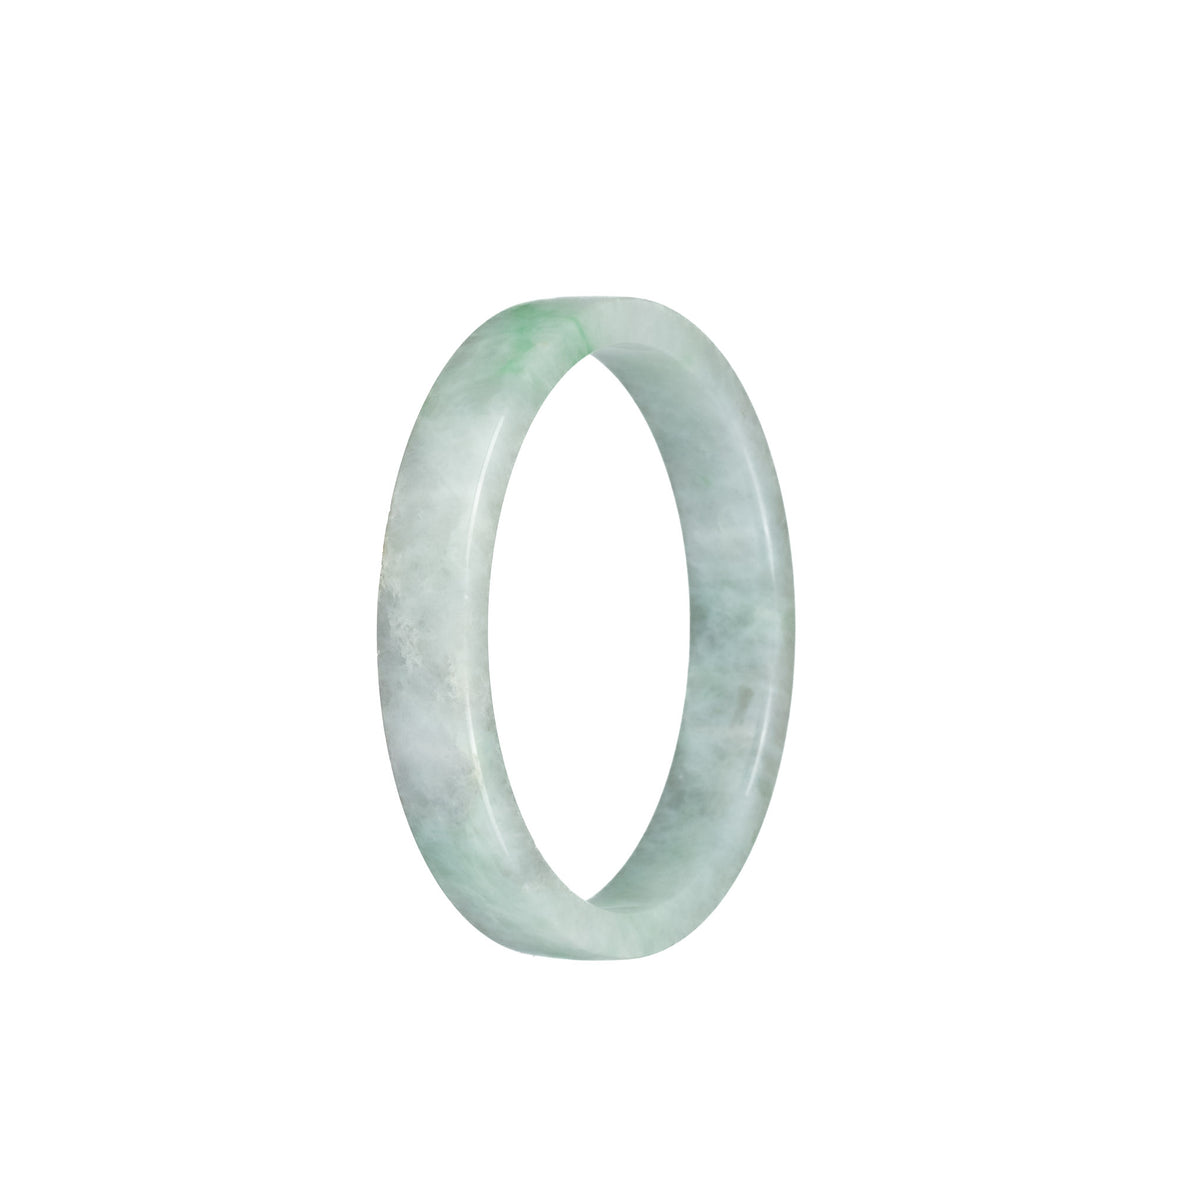 Real Grade A Pale Green with Green Pattern Jade Bangle - 52mm Flat